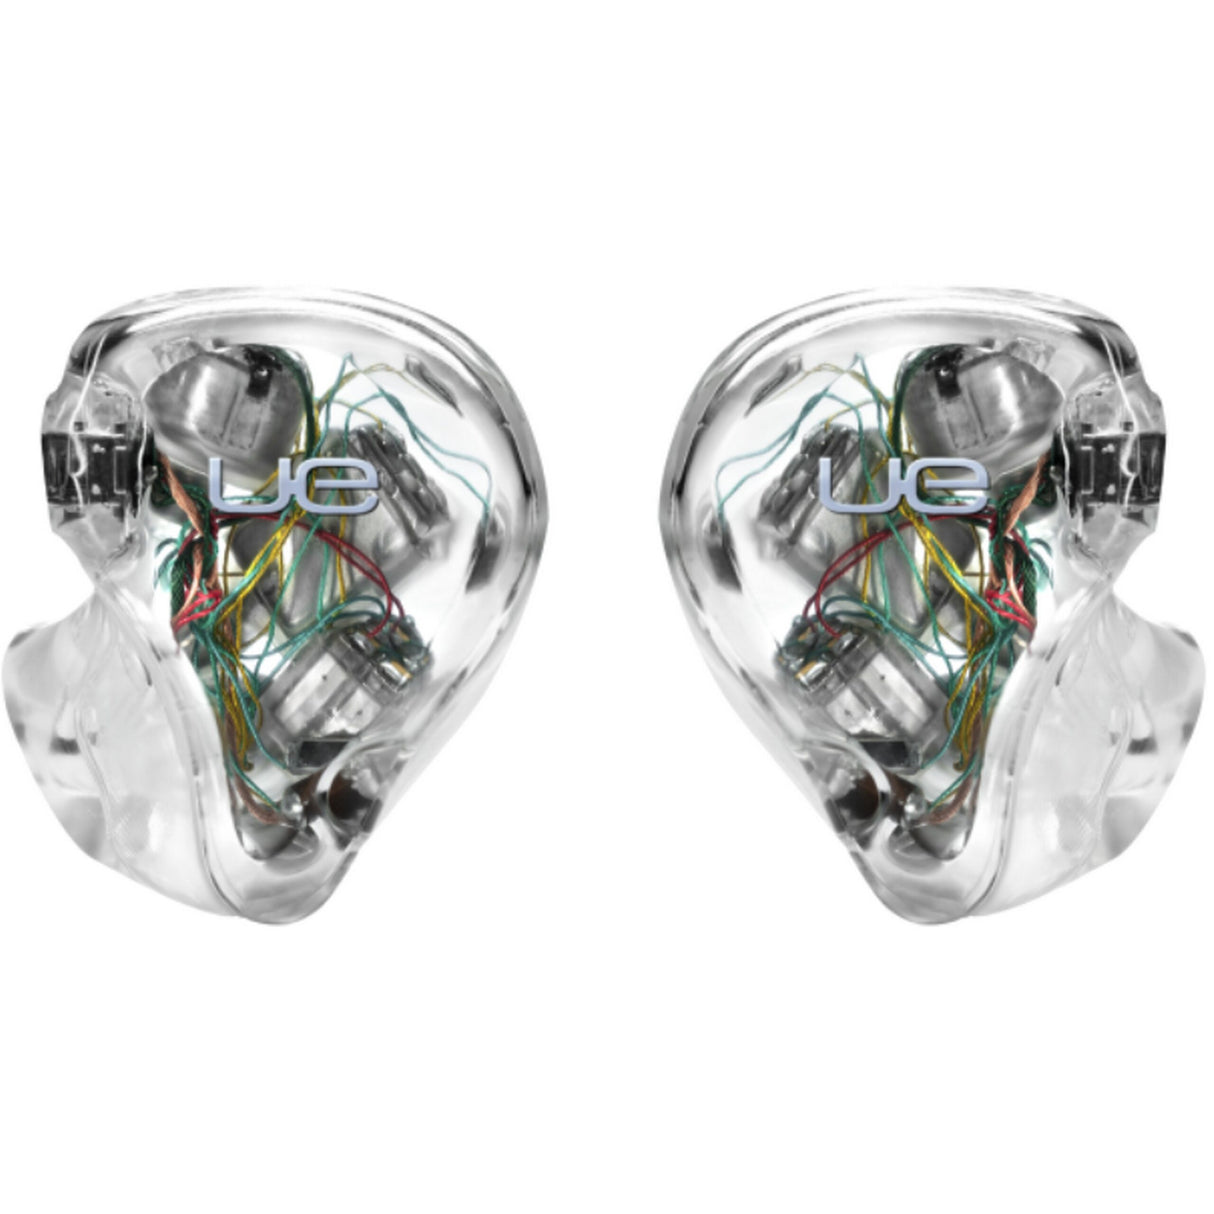 Ultimate Ears UE LIVE In-Ear Monitor with Universal Tips, Clear